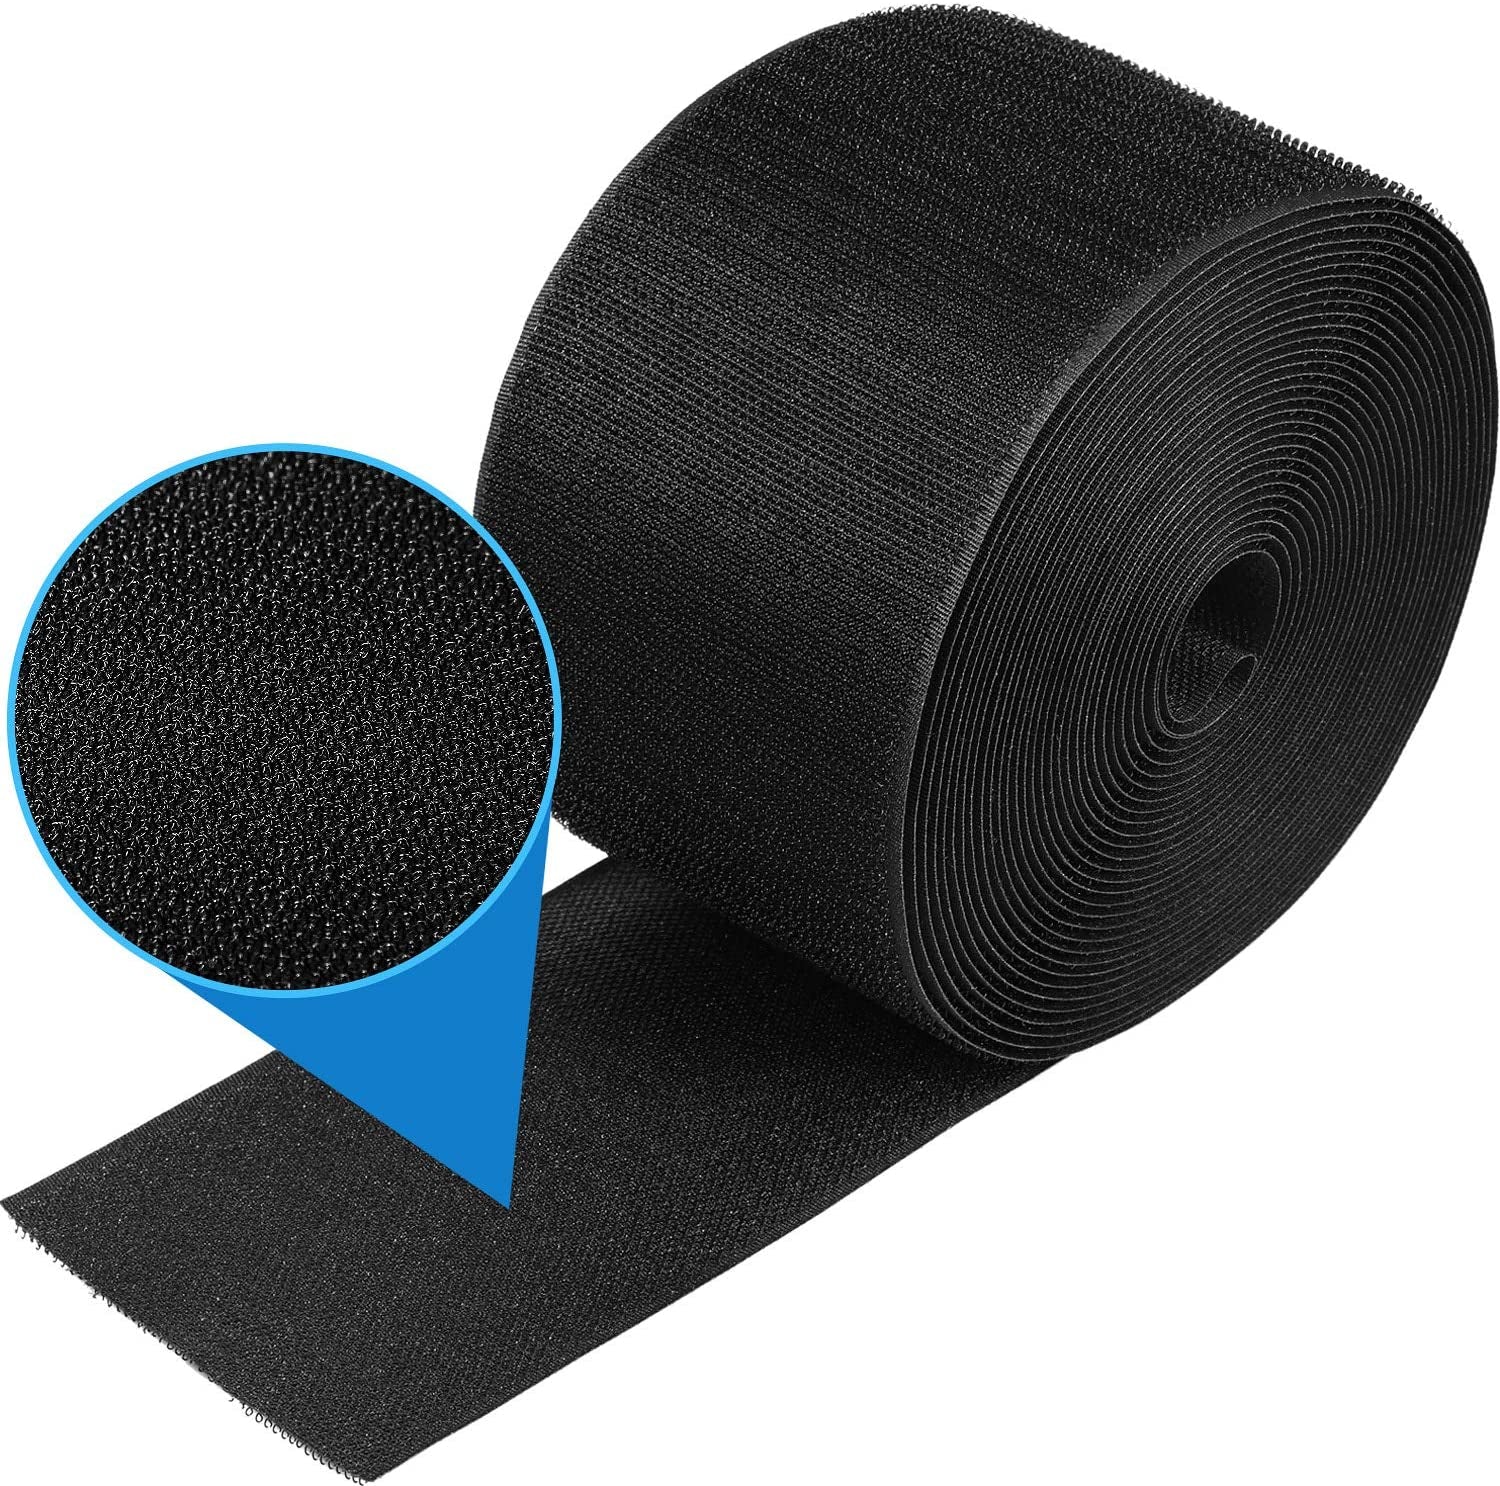 WILLBOND, 1 Piece (24 Feet in Length) Black Cable Floor Strip Carpet Floor Cord Cover Cable Protector Cable Management, Protect Cords and Prevent a Trip Hazard